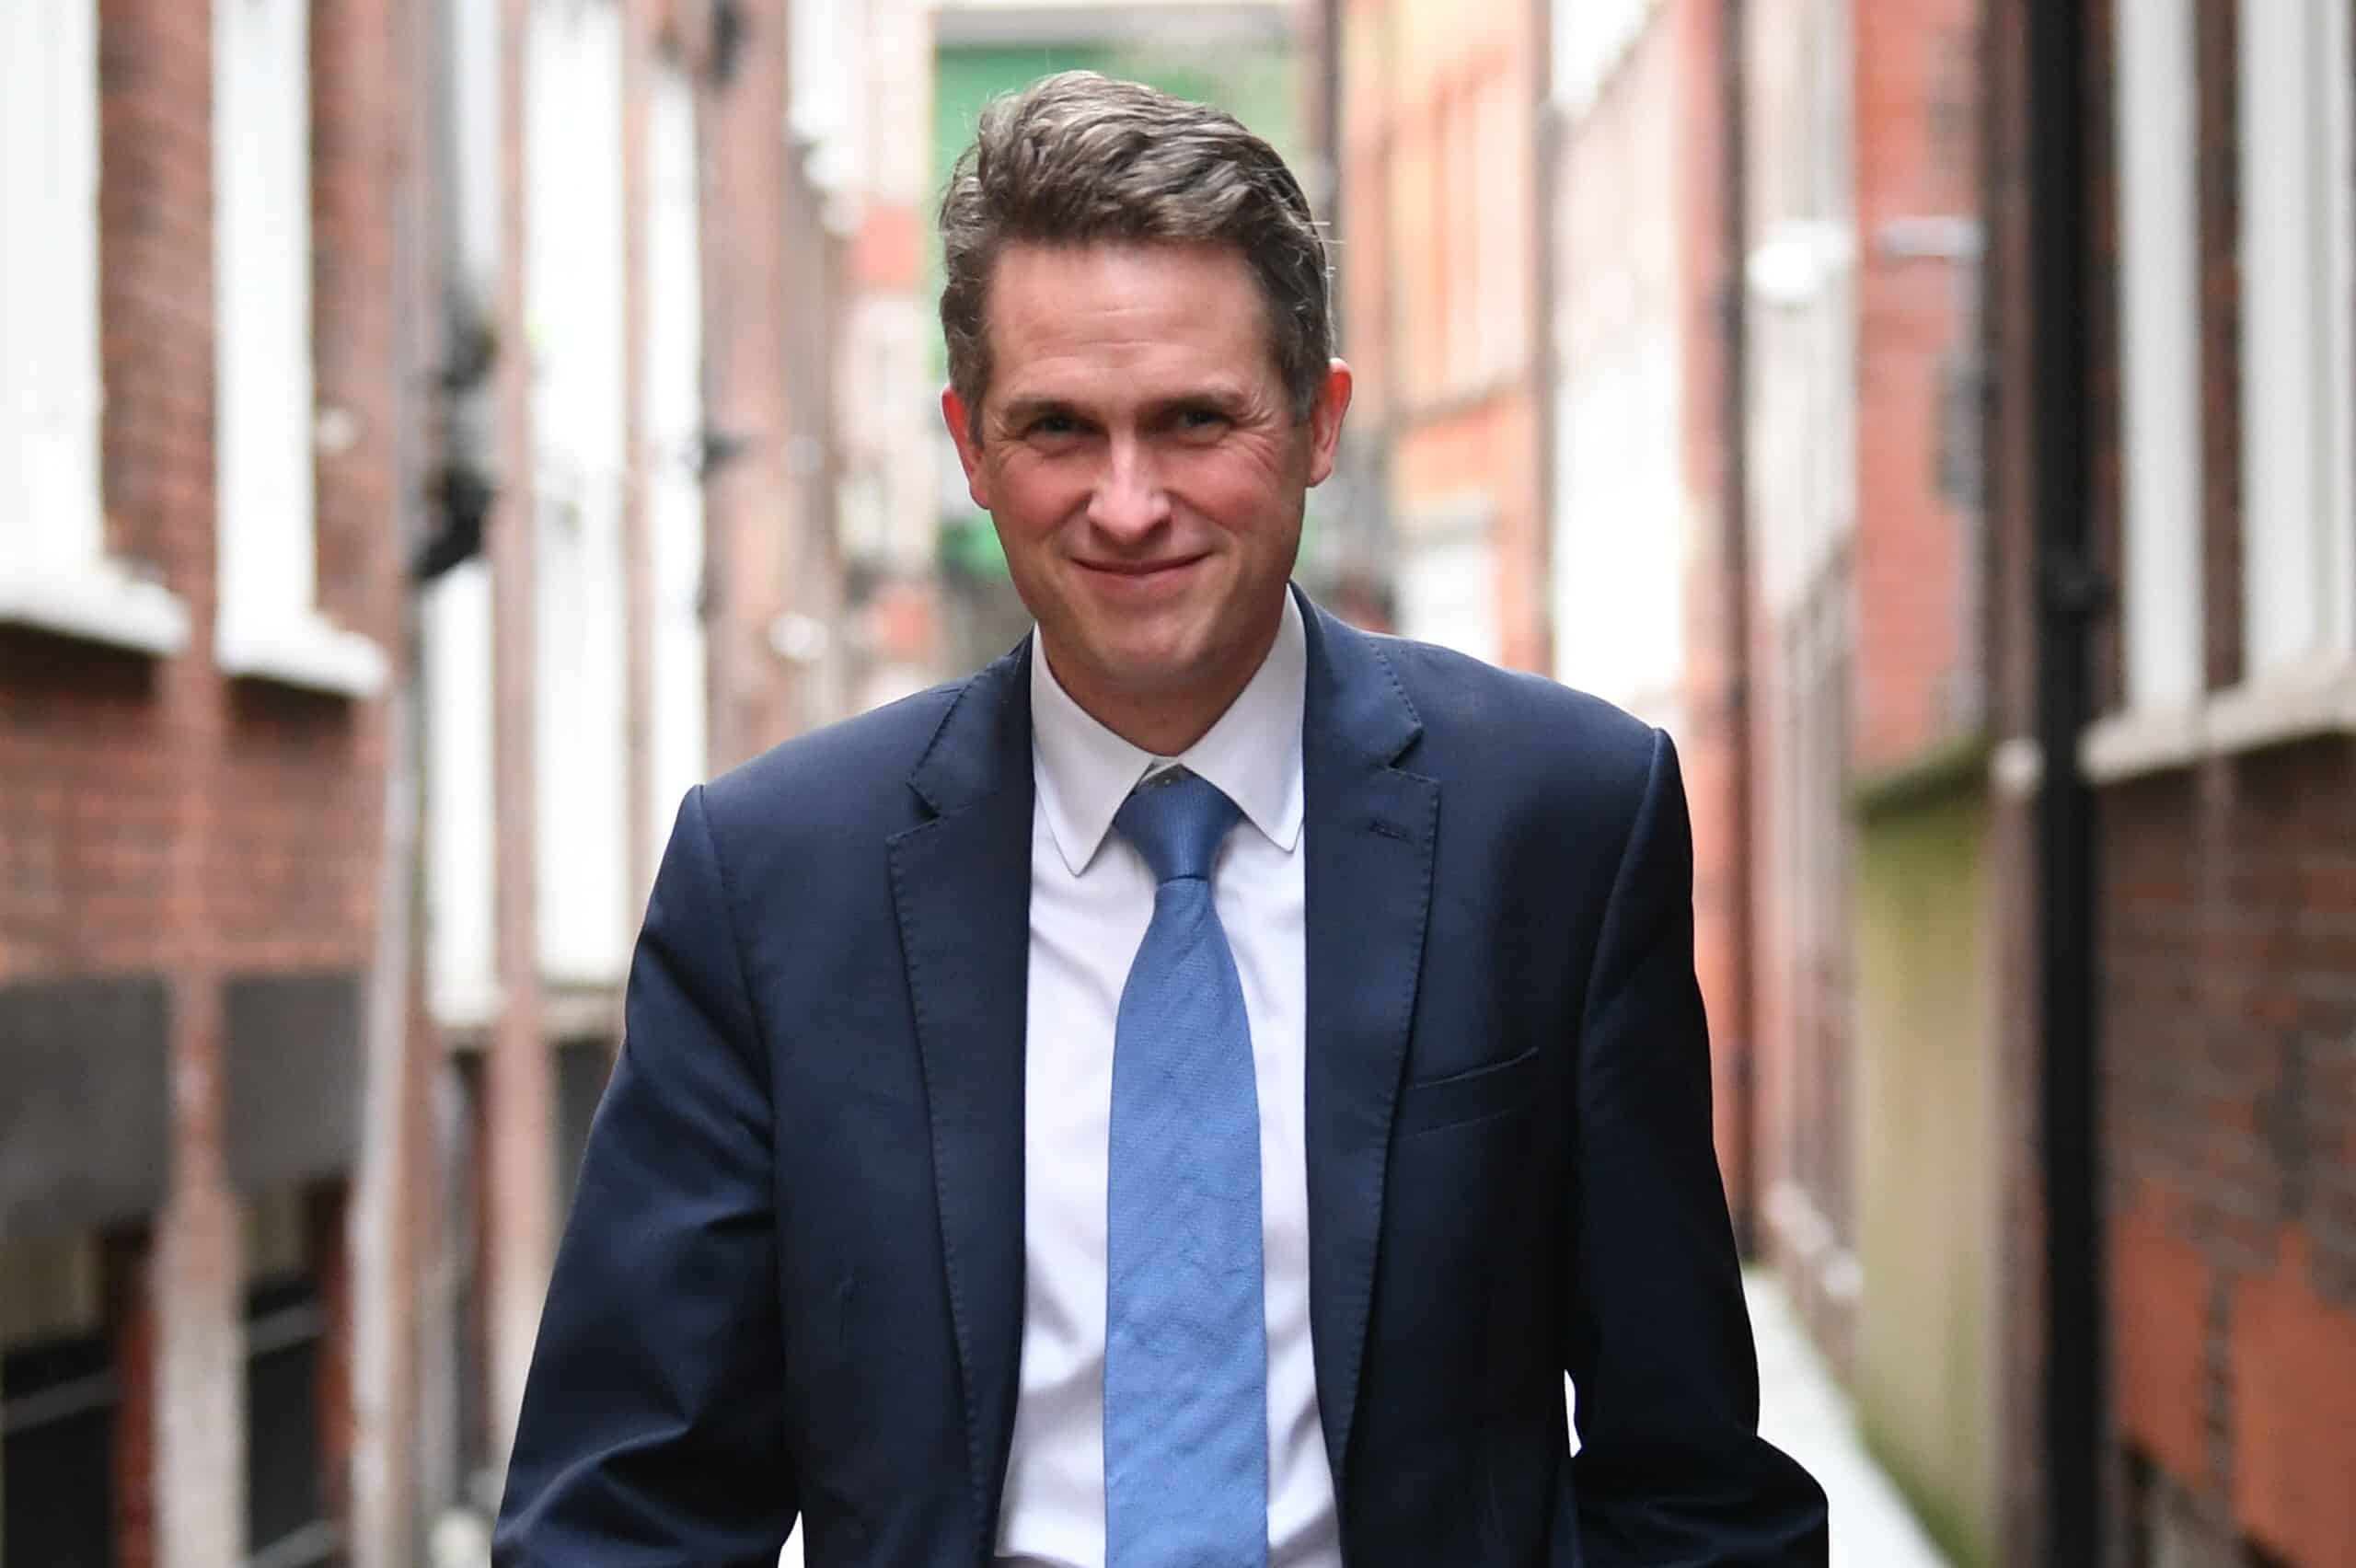 Teachers were ‘looking for an excuse not to work’ during pandemic, Williamson said